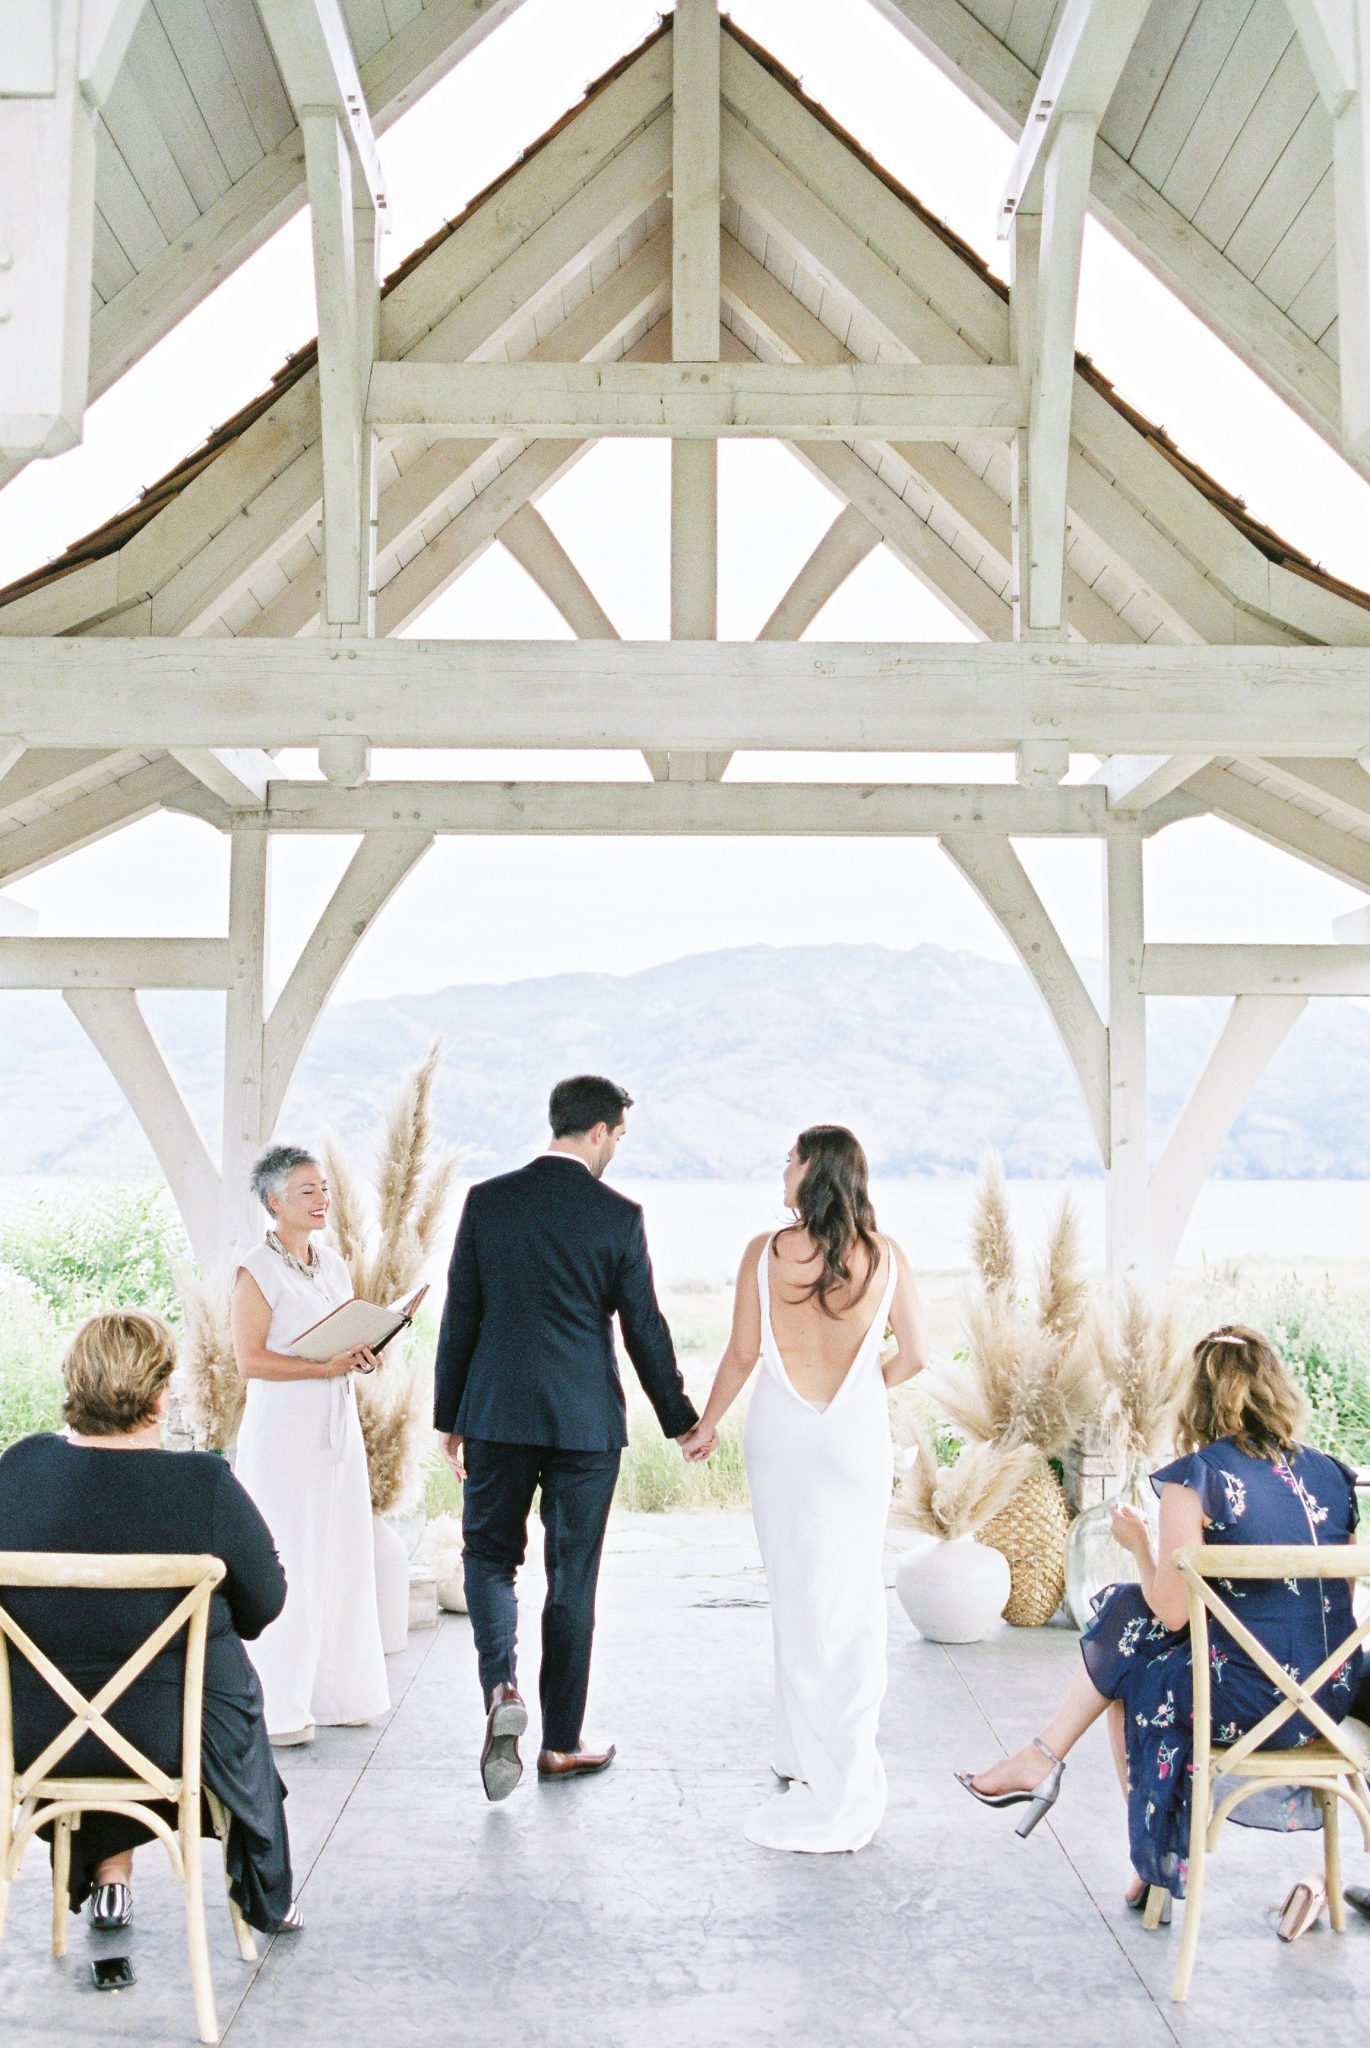 Bride and groom walk into the chapel inspired gazebo for their modern Okanagan ceremony in British Columbia